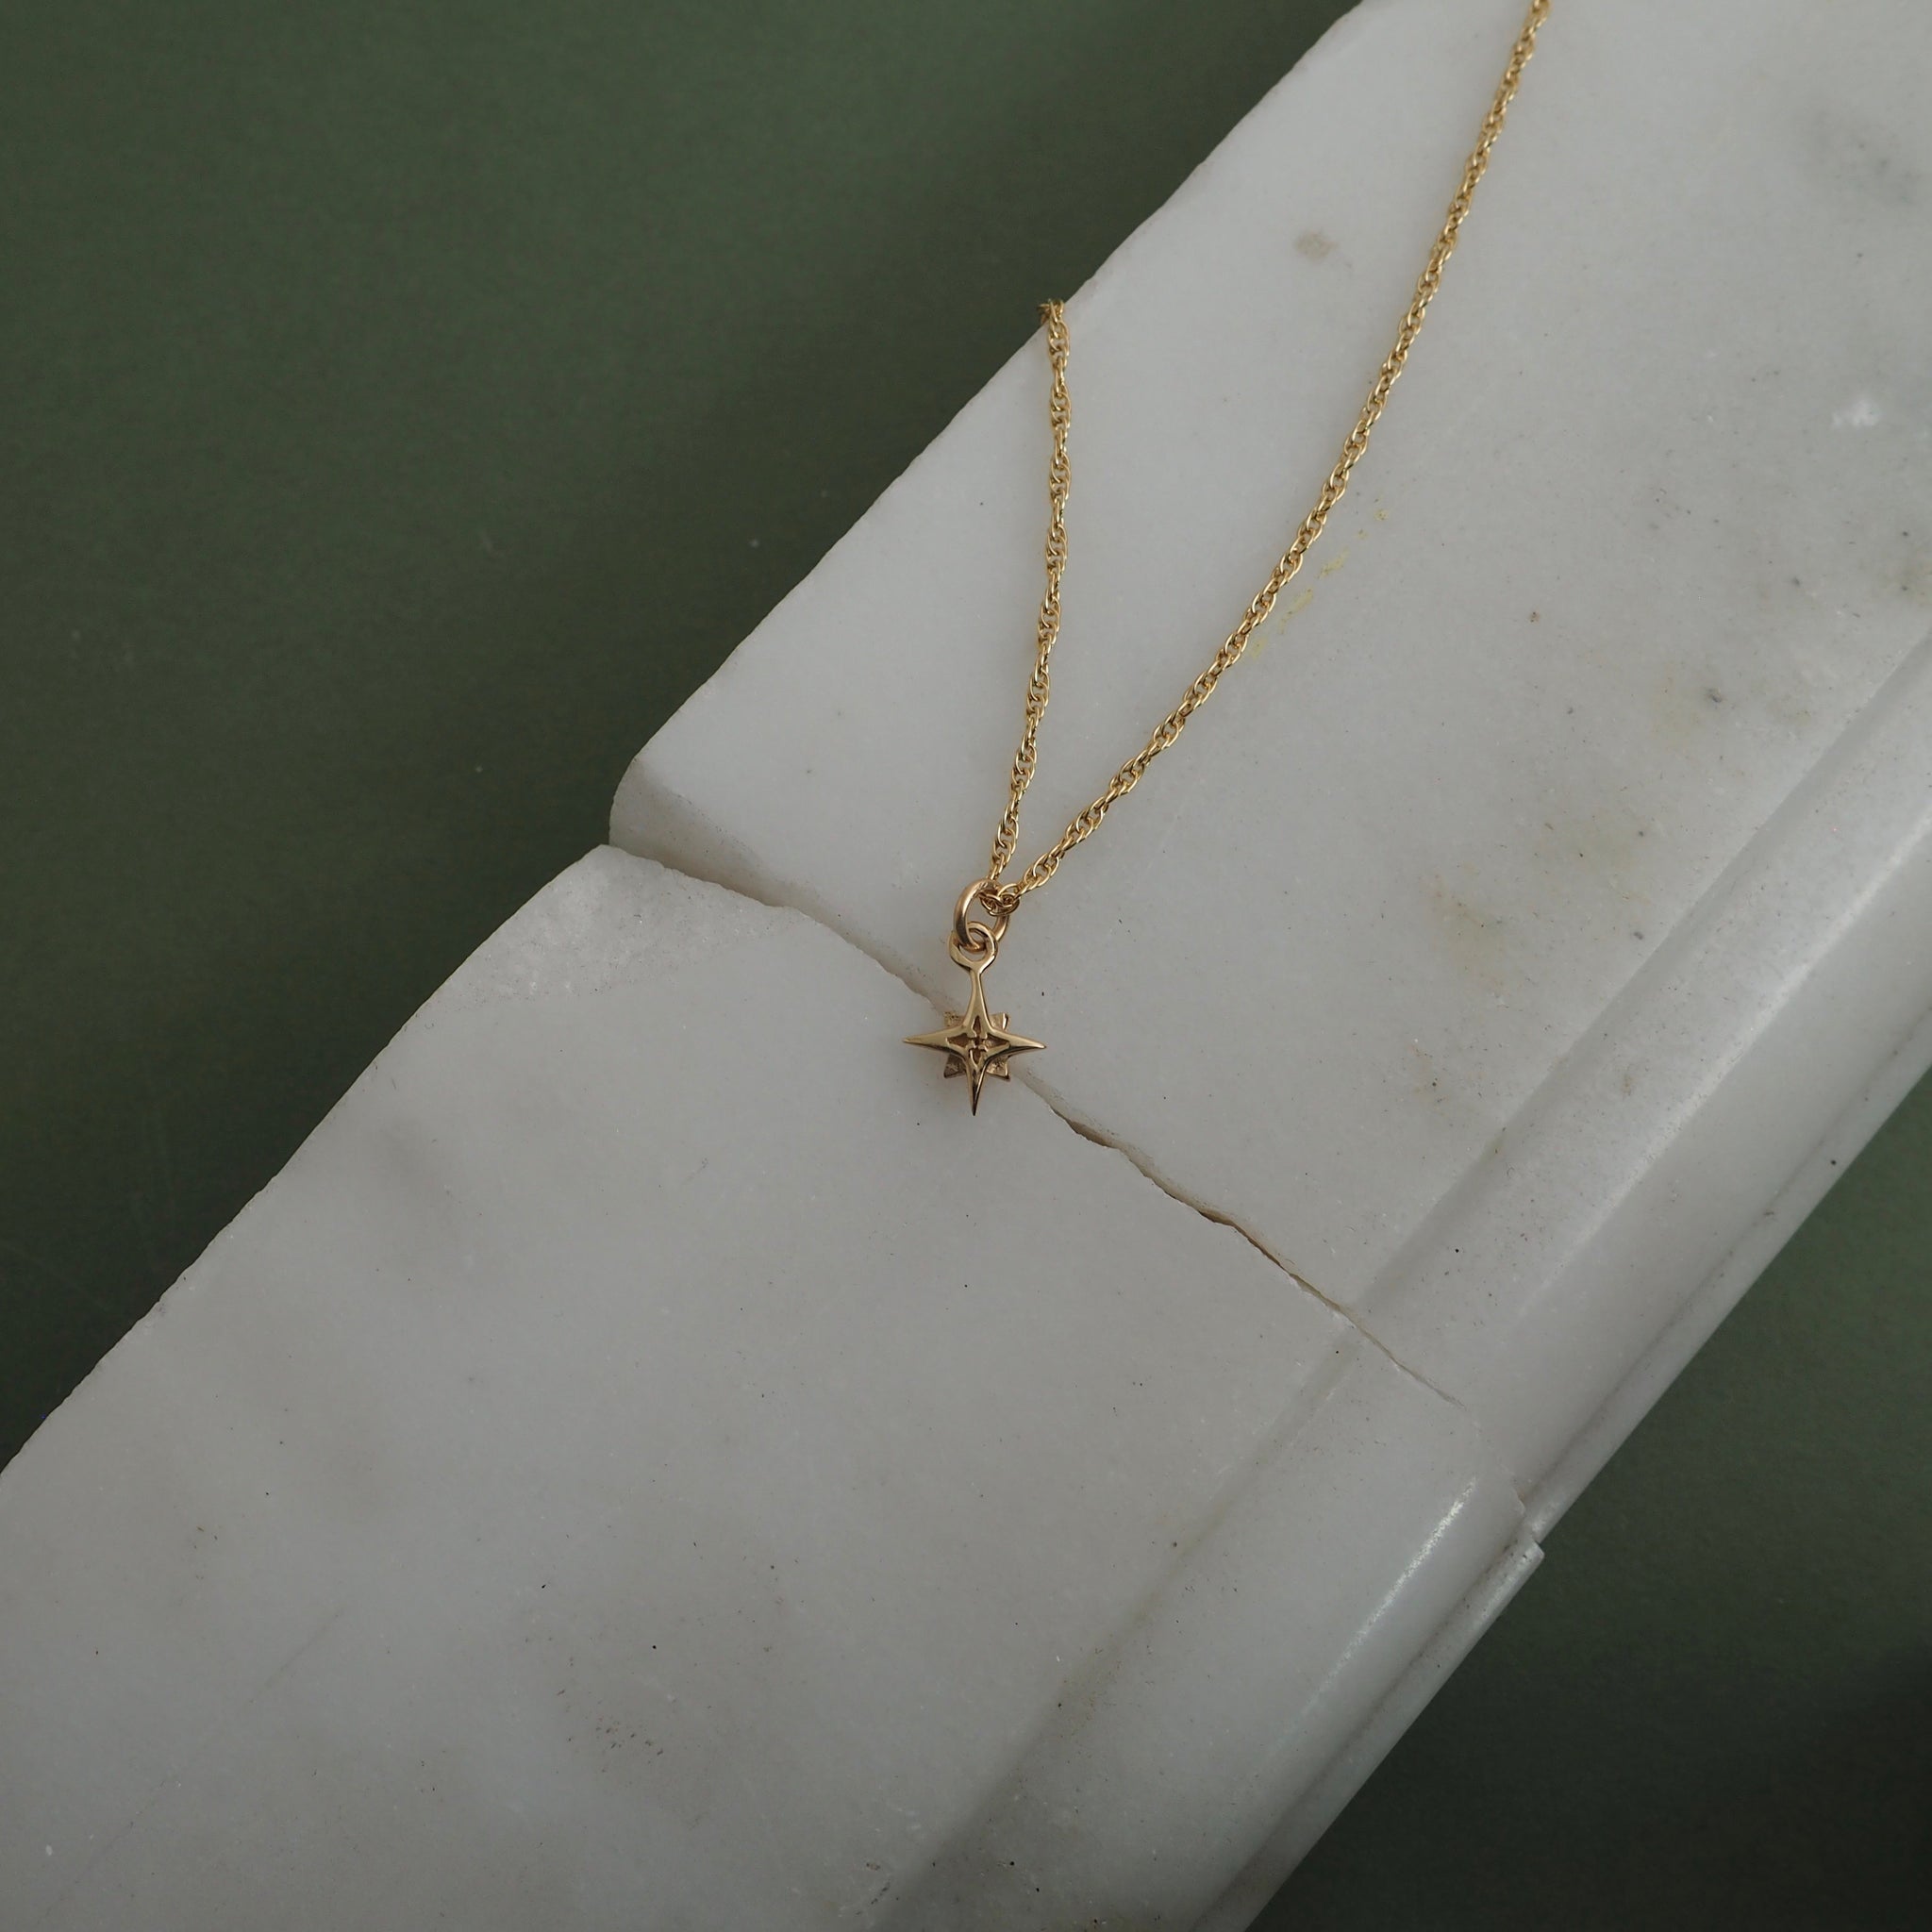 9ct Gold Small Compass Star Necklace by Yasmin Everley